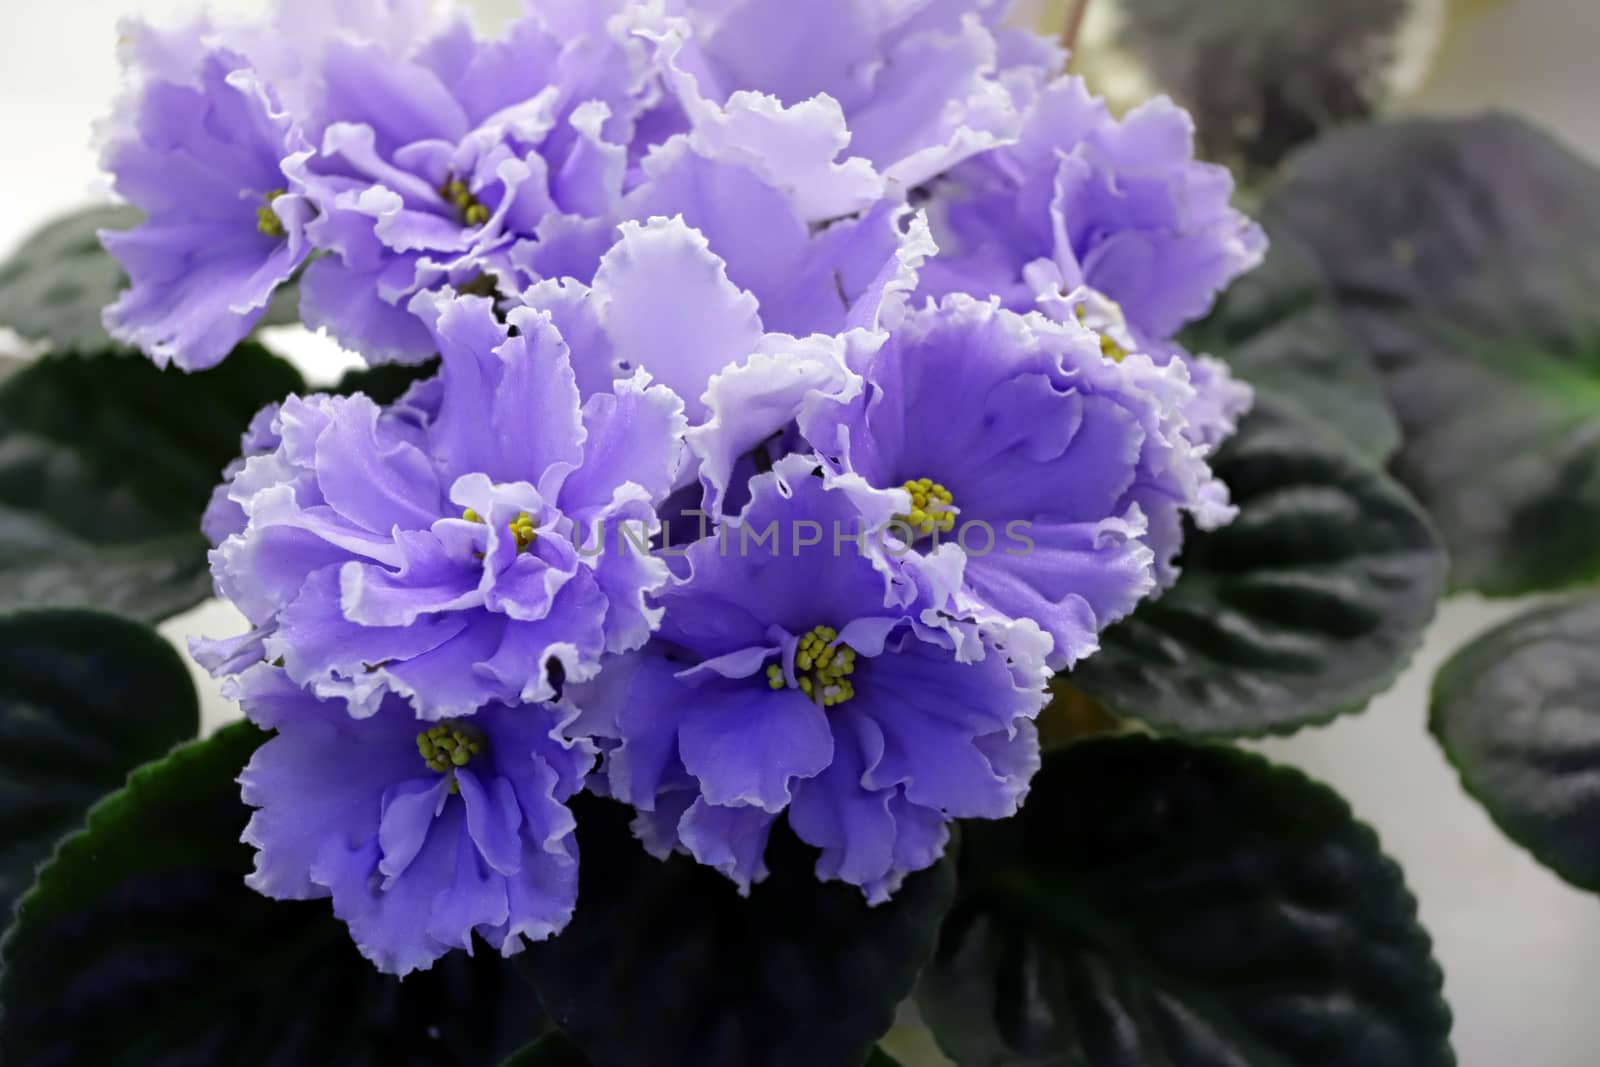 Beautiful Saintpaulia or Uzumbar violet. Blue indoor flowers close-up. Natural floral background for happy birthday, mother's day, women's day, anniversary, wedding invitation